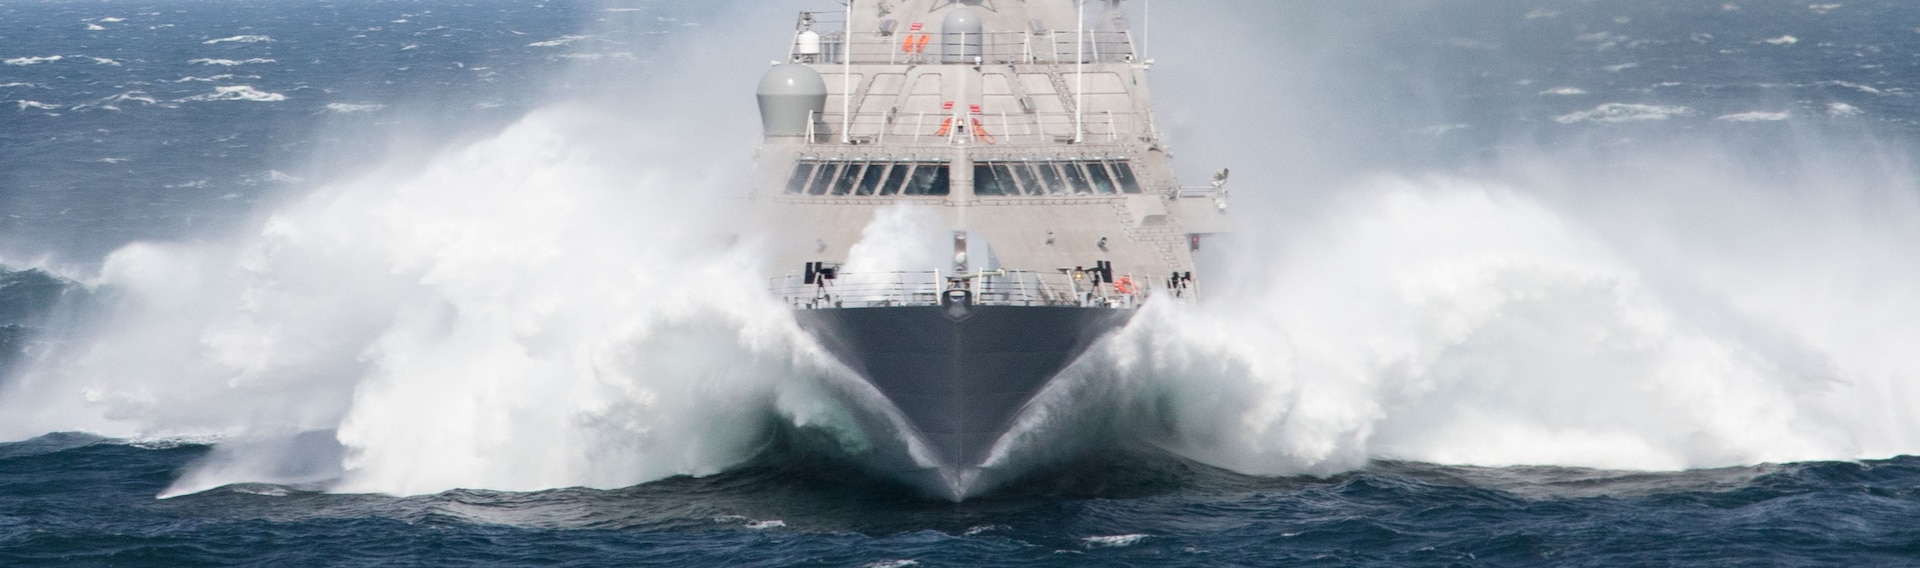 150918-N-ZZ999-001 (Sept. 18, 2015) MARINETTE, Wisconsin - USS Milwaukee makes waves during its acceptance trial. The acceptance trial is the last significant milestone before delivery of the ship to the Navy, which is planned for October. 